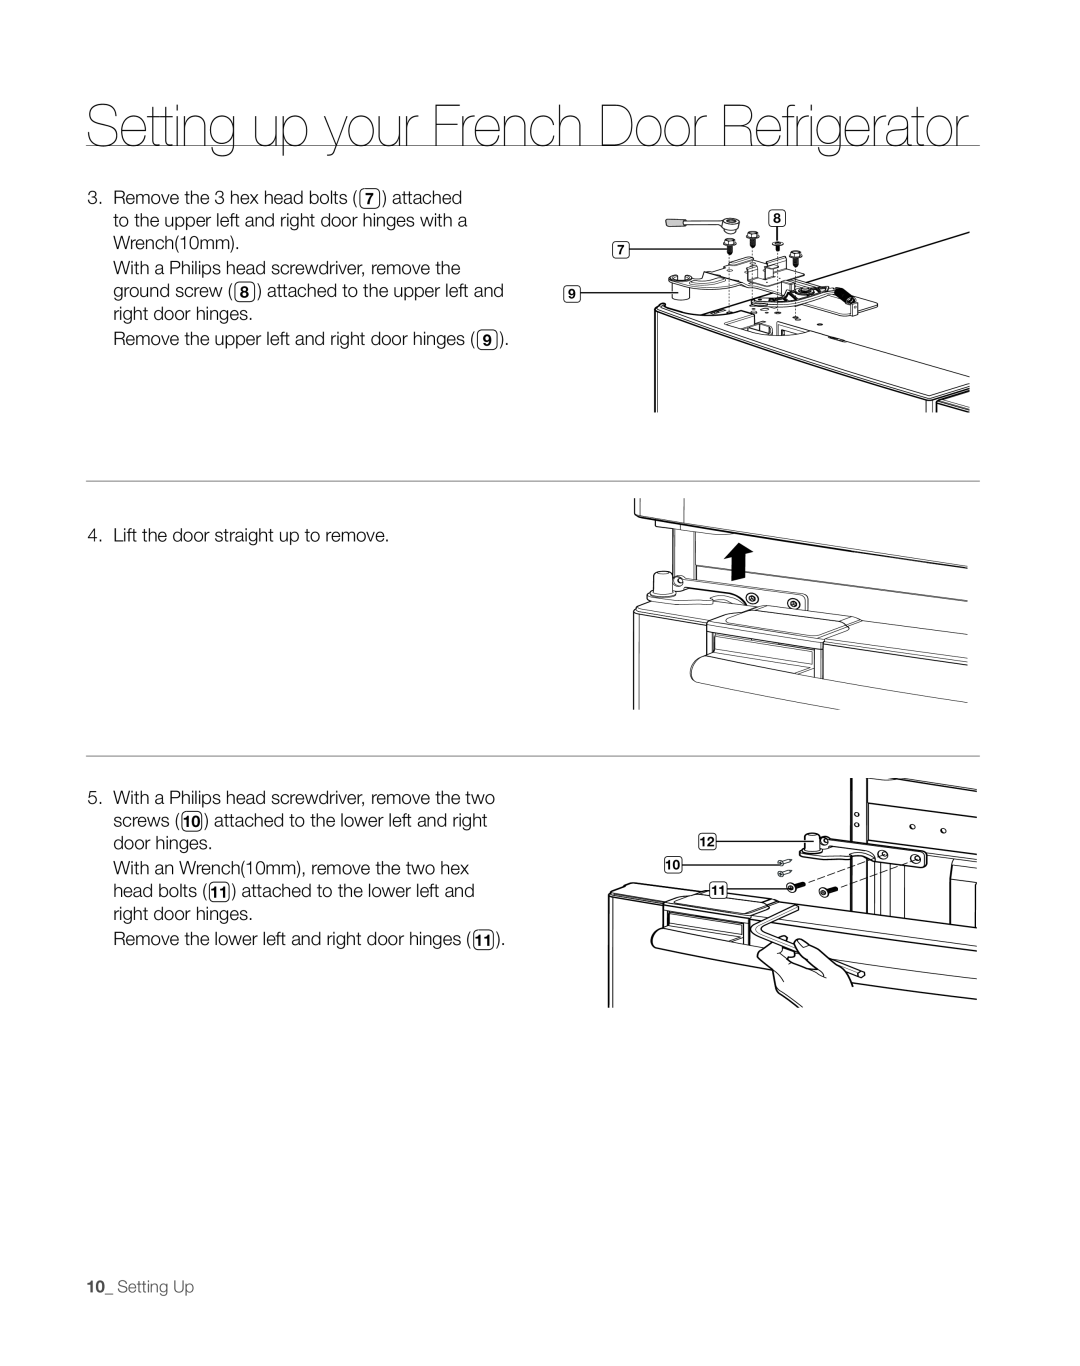 Sears RFG297AA manual Setting up your French Door Refrigerator, Remove the 3 hex head bolts 7 attached 